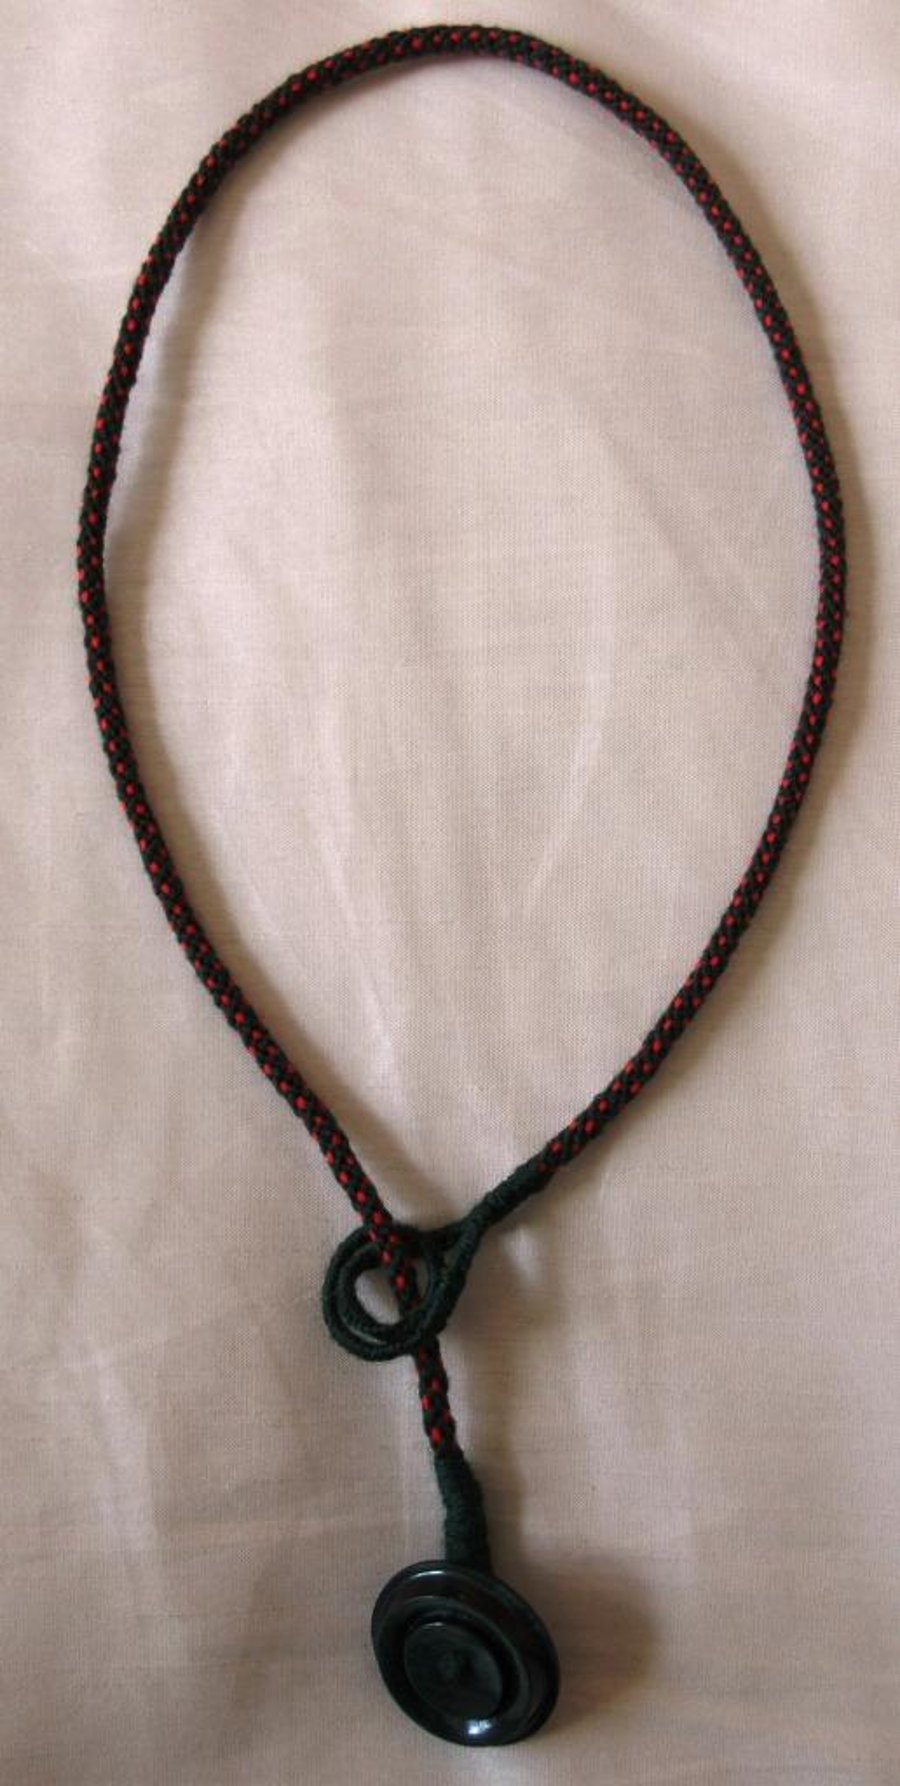 A lariat-style necklace in kumihimo braid with button trim